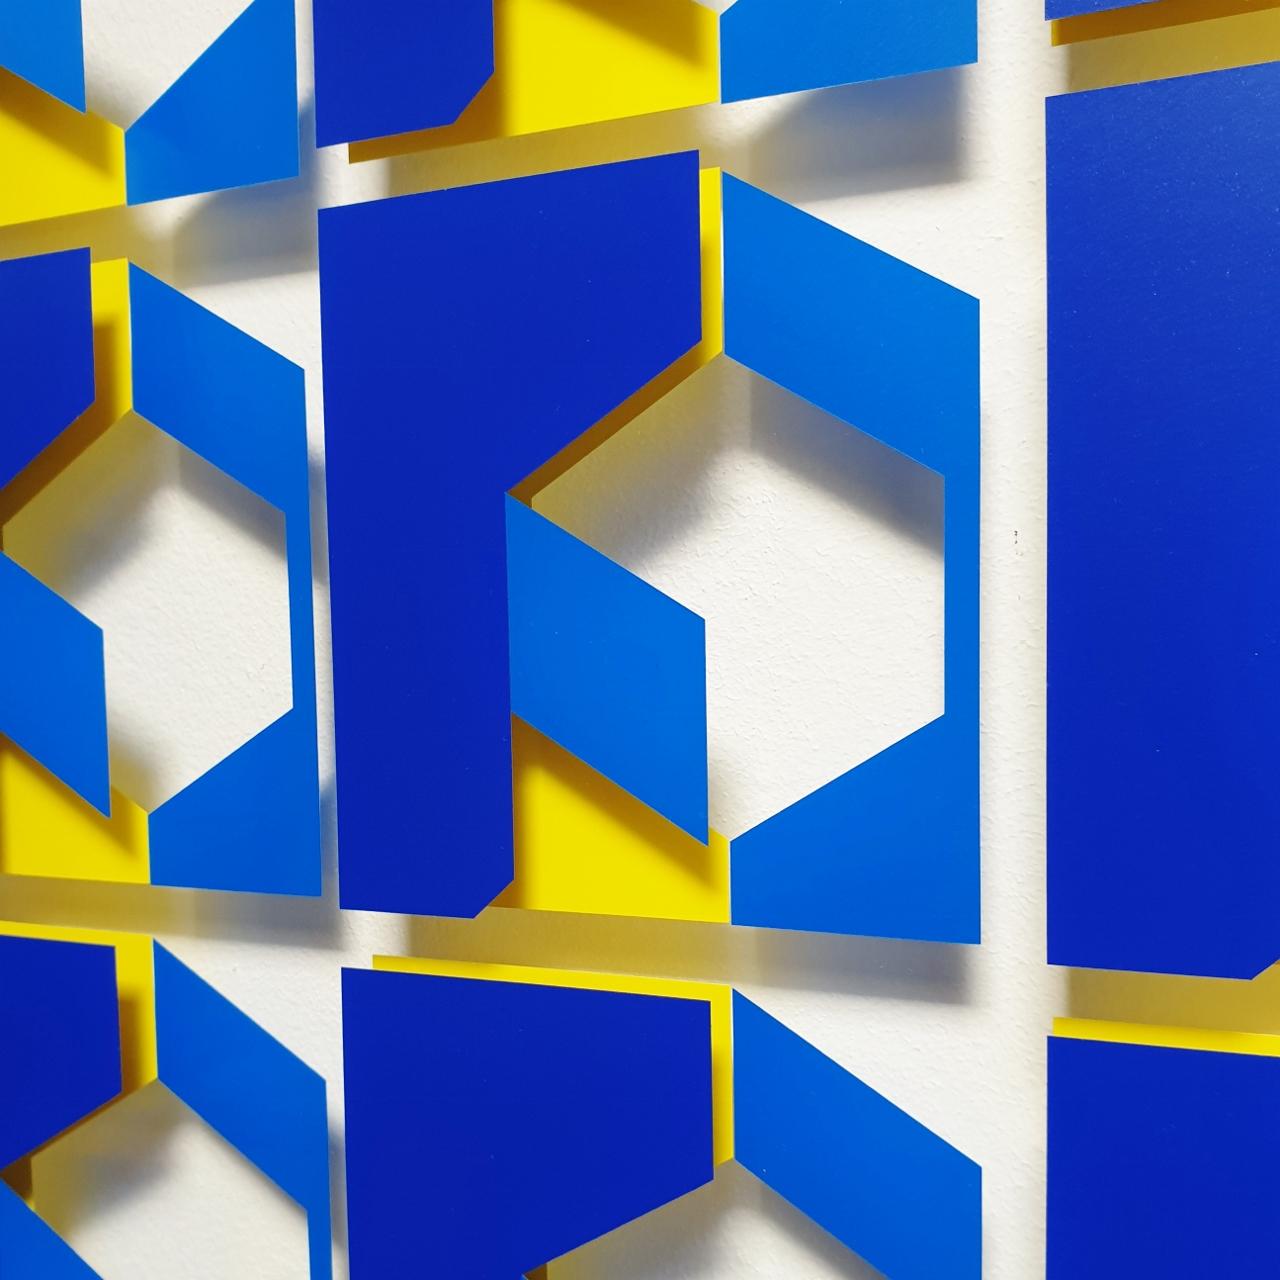 Relief MG902 is a medium size contemporary modern abstract geometric wall relief by Dutch visual artist Let de Kok. This relief consists of two interspaced panels of museum glass with a multi-layer geometric pattern cut from uv-resistant polymeric